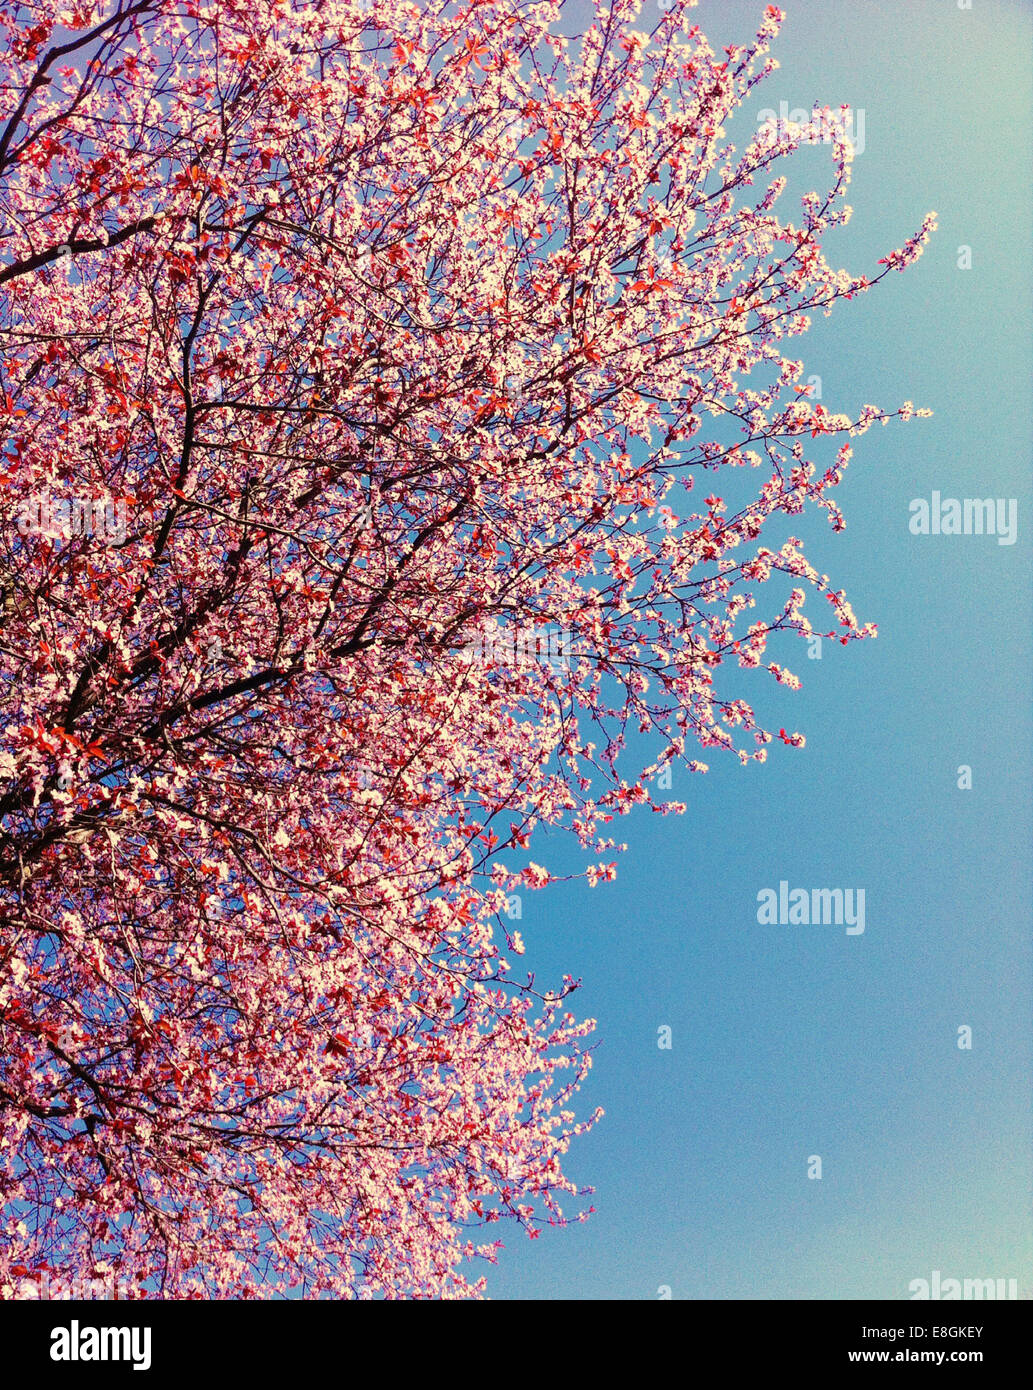 Pink cherry blossoms against blue sky, Vancouver, British Columbia, Canada Stock Photo